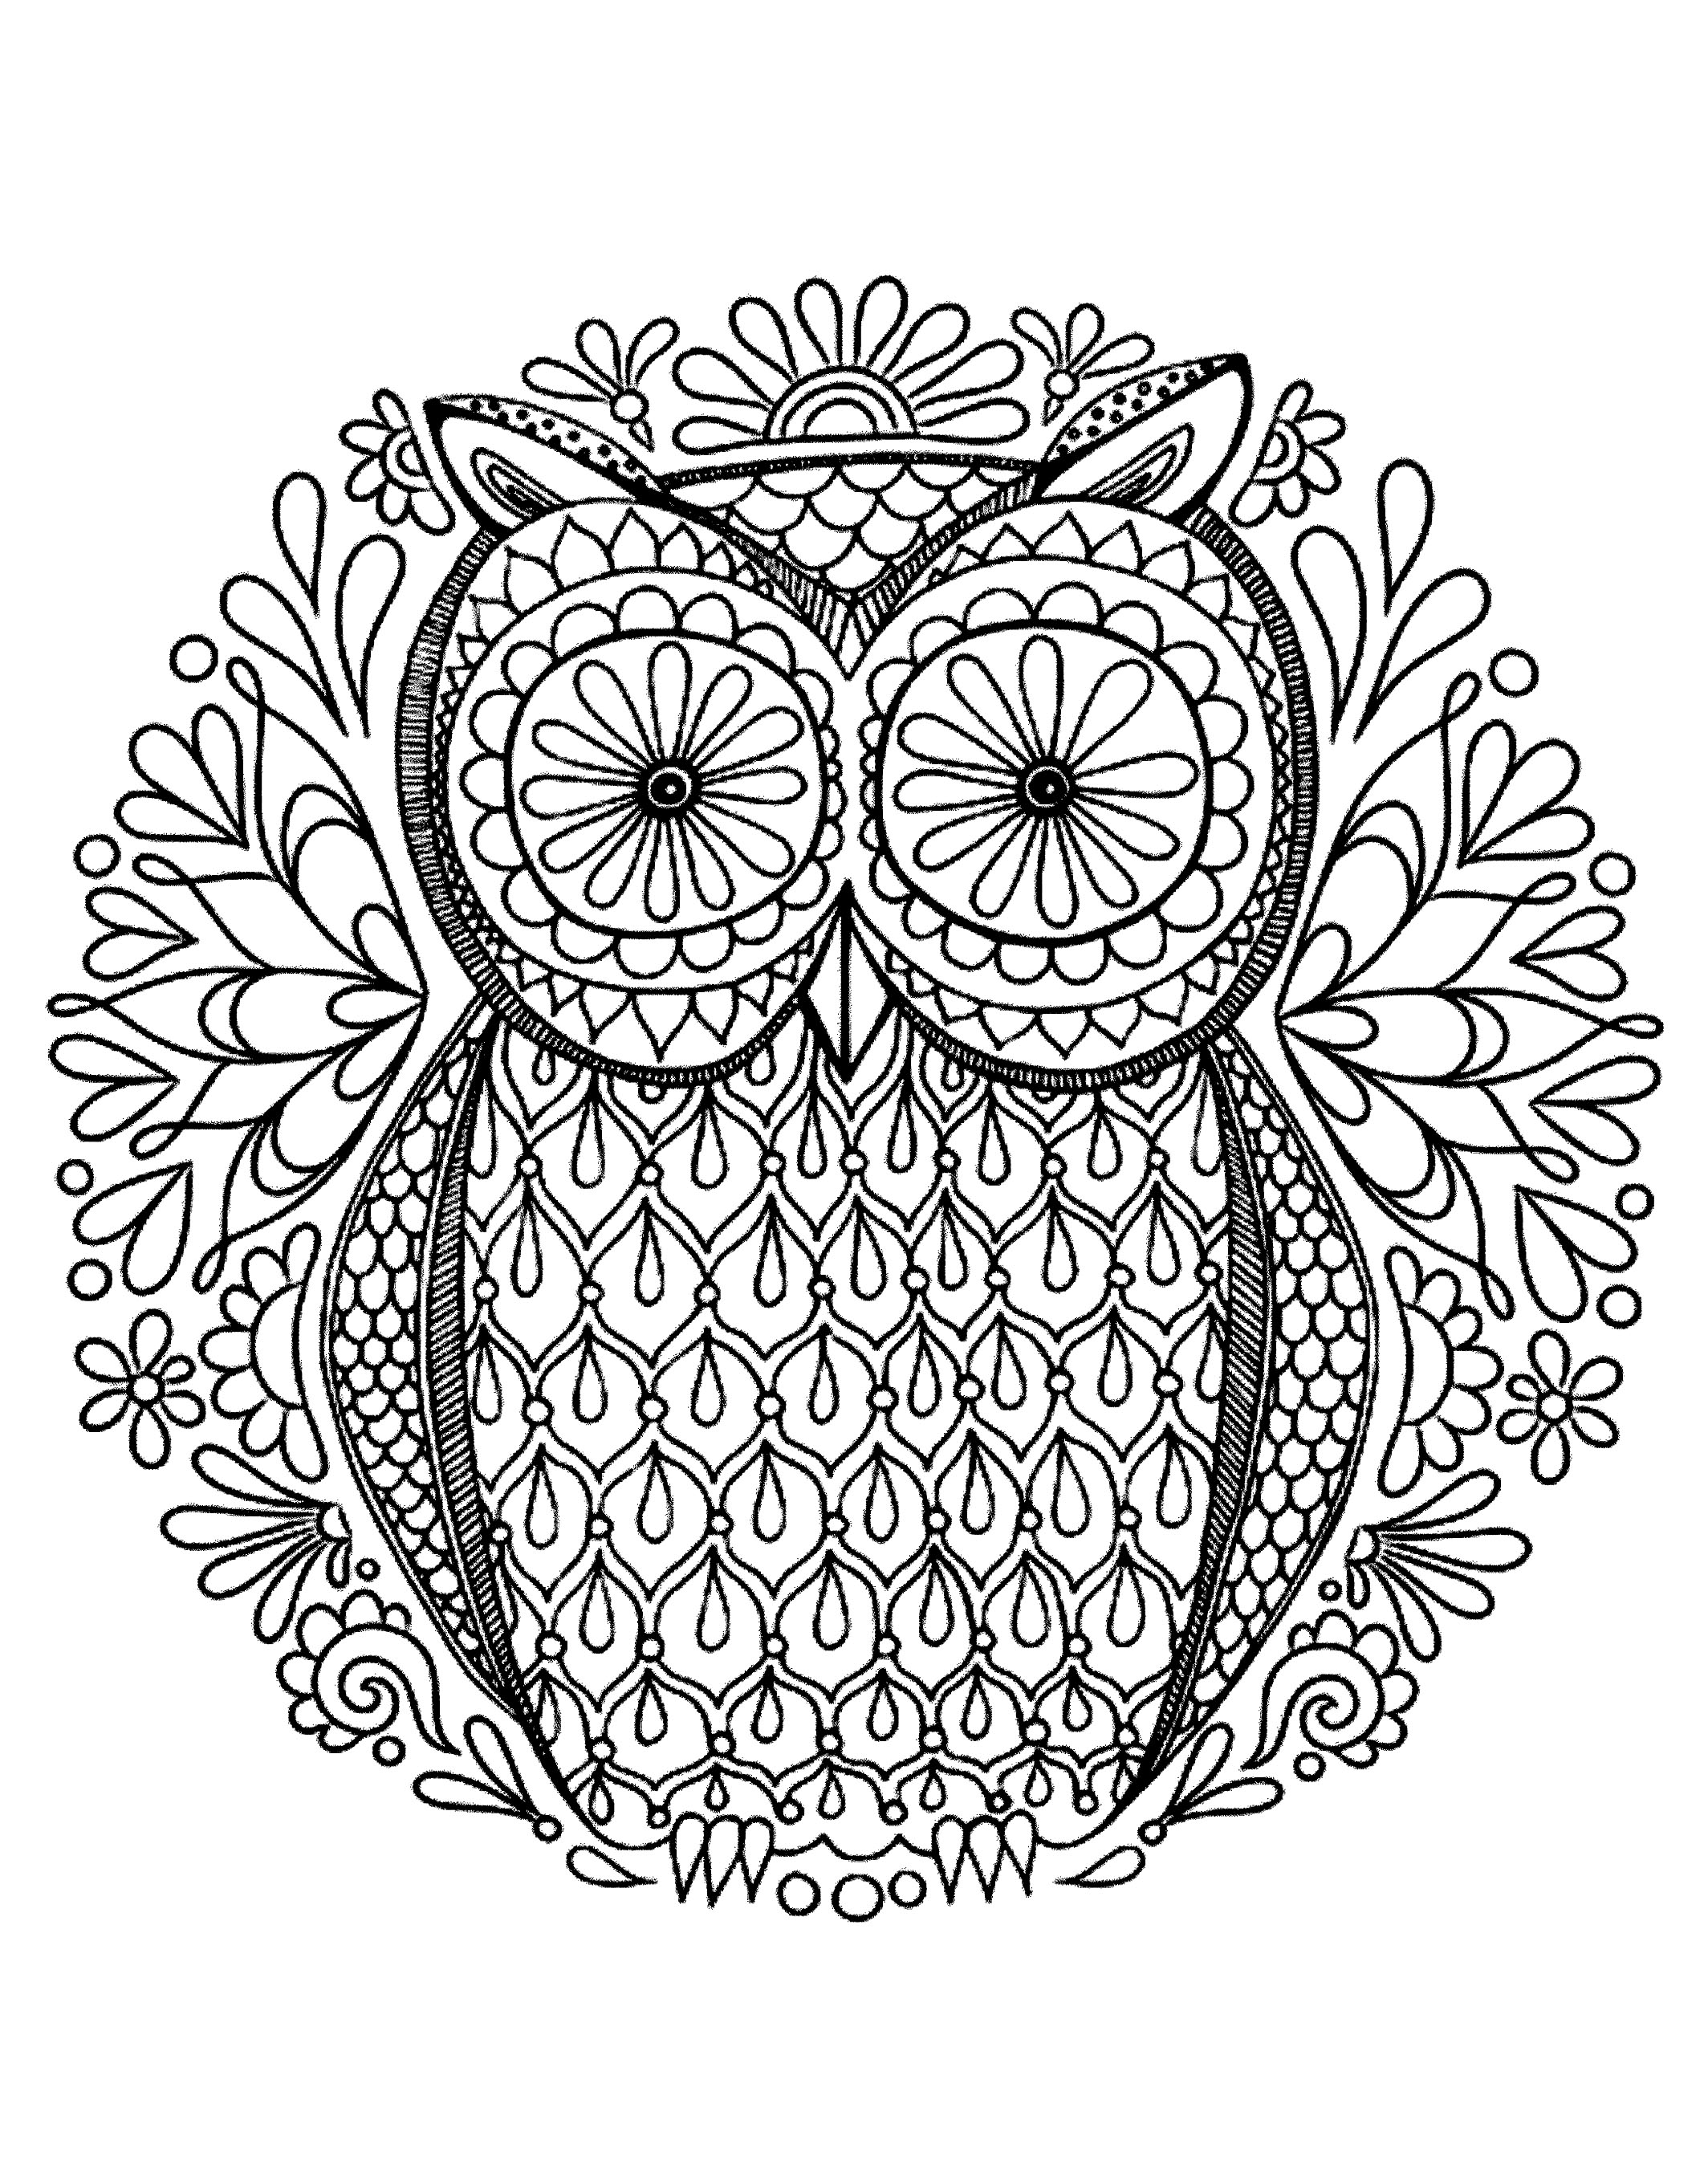 Download Very simple owl - Owls Adult Coloring Pages